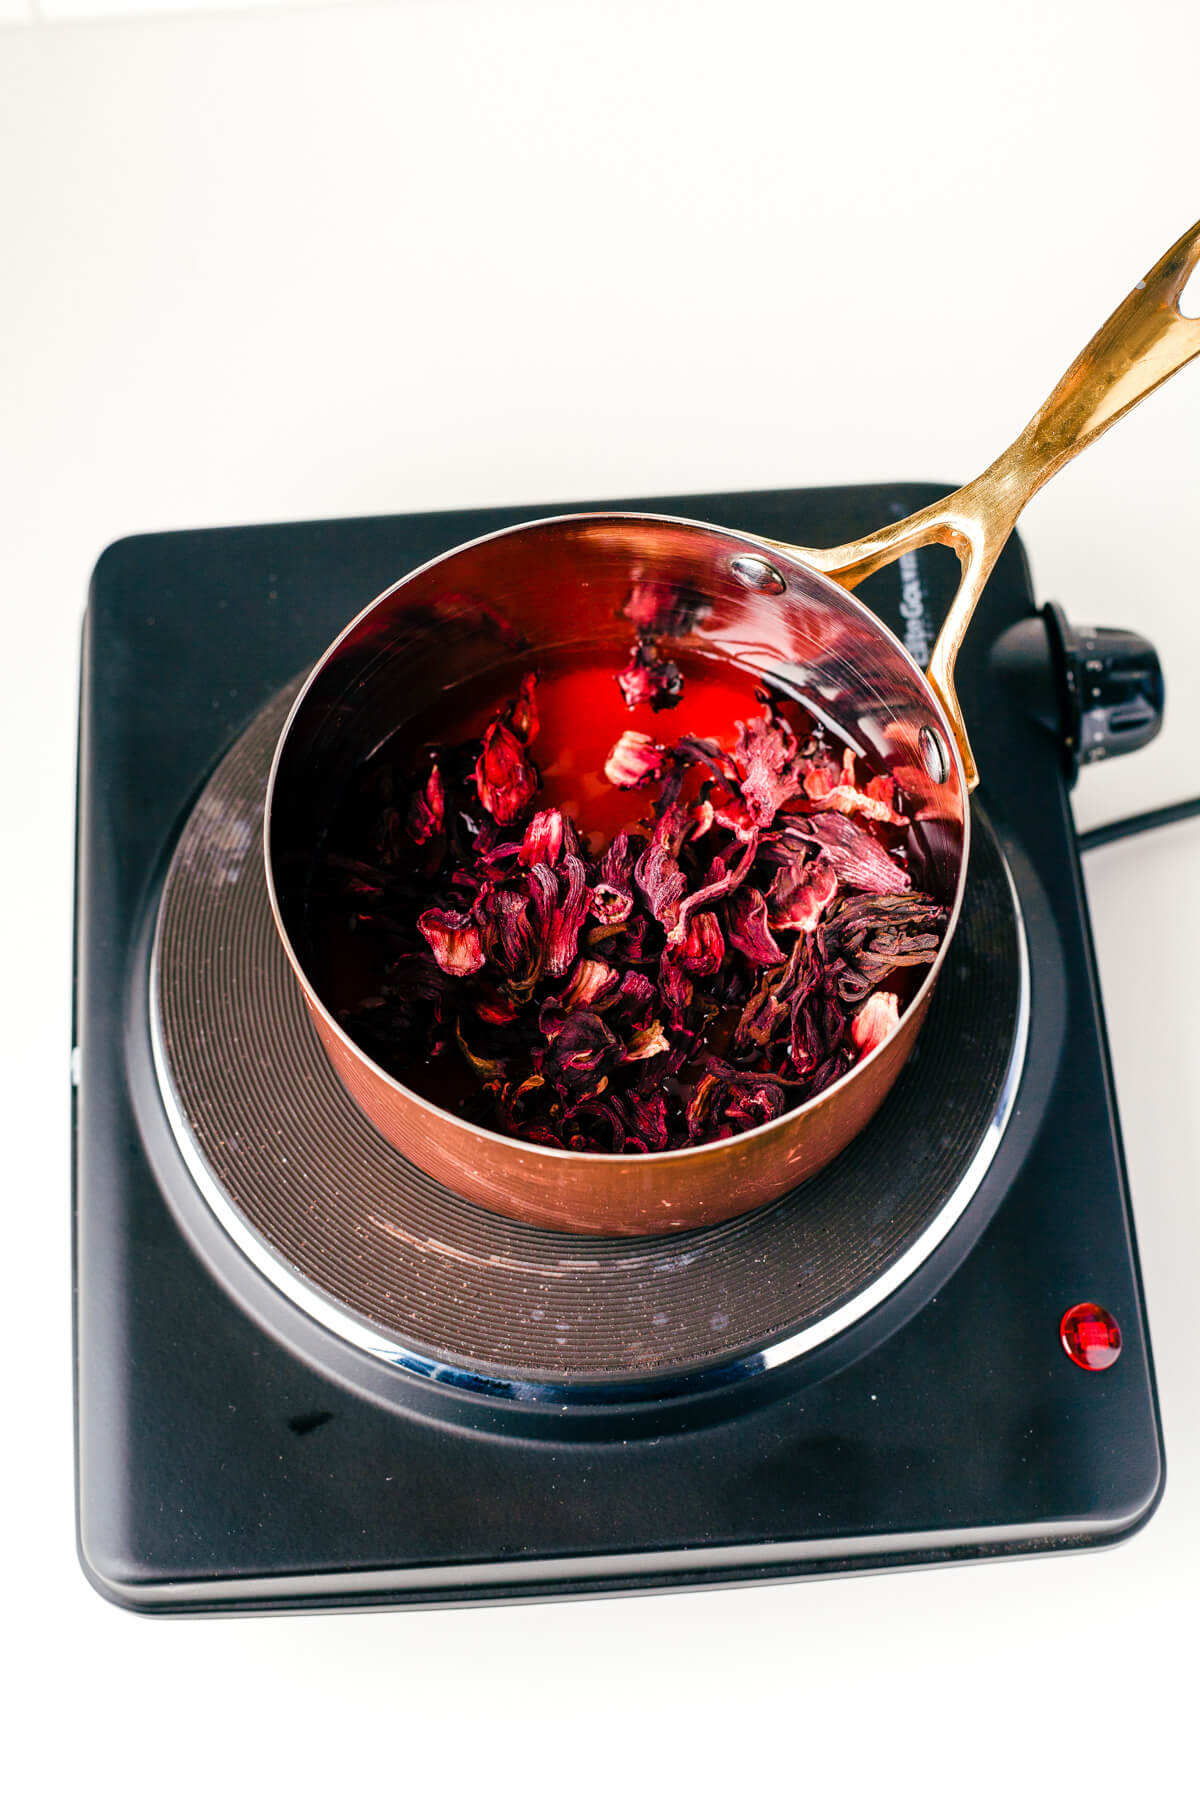 Showing how to make cocktail syrup by infusing pomegranate juice with hibiscus and sugar in a saucepan.